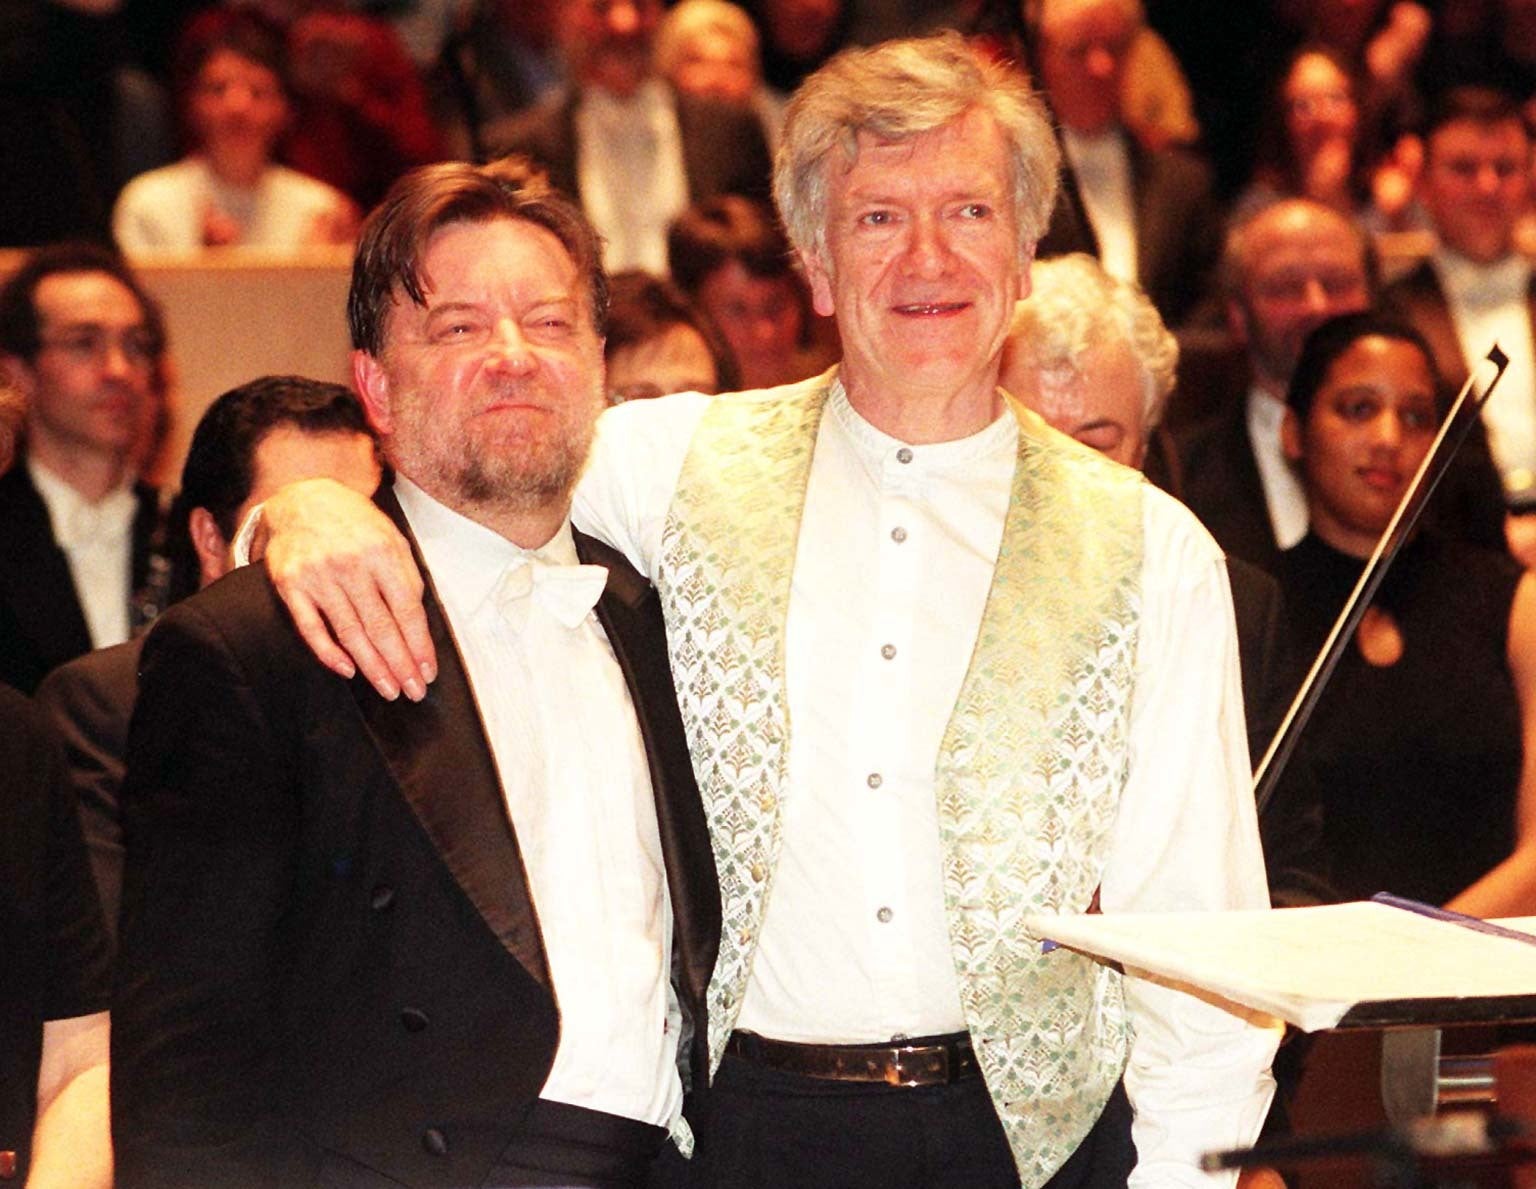 Composer Anthony Payne (right) and his conductor Sir Andrew Davis enjoy the audience’s applause after the first public performance of Elgar’s unfinished Third Symphony at the Royal Festival Hall in London, February 1998